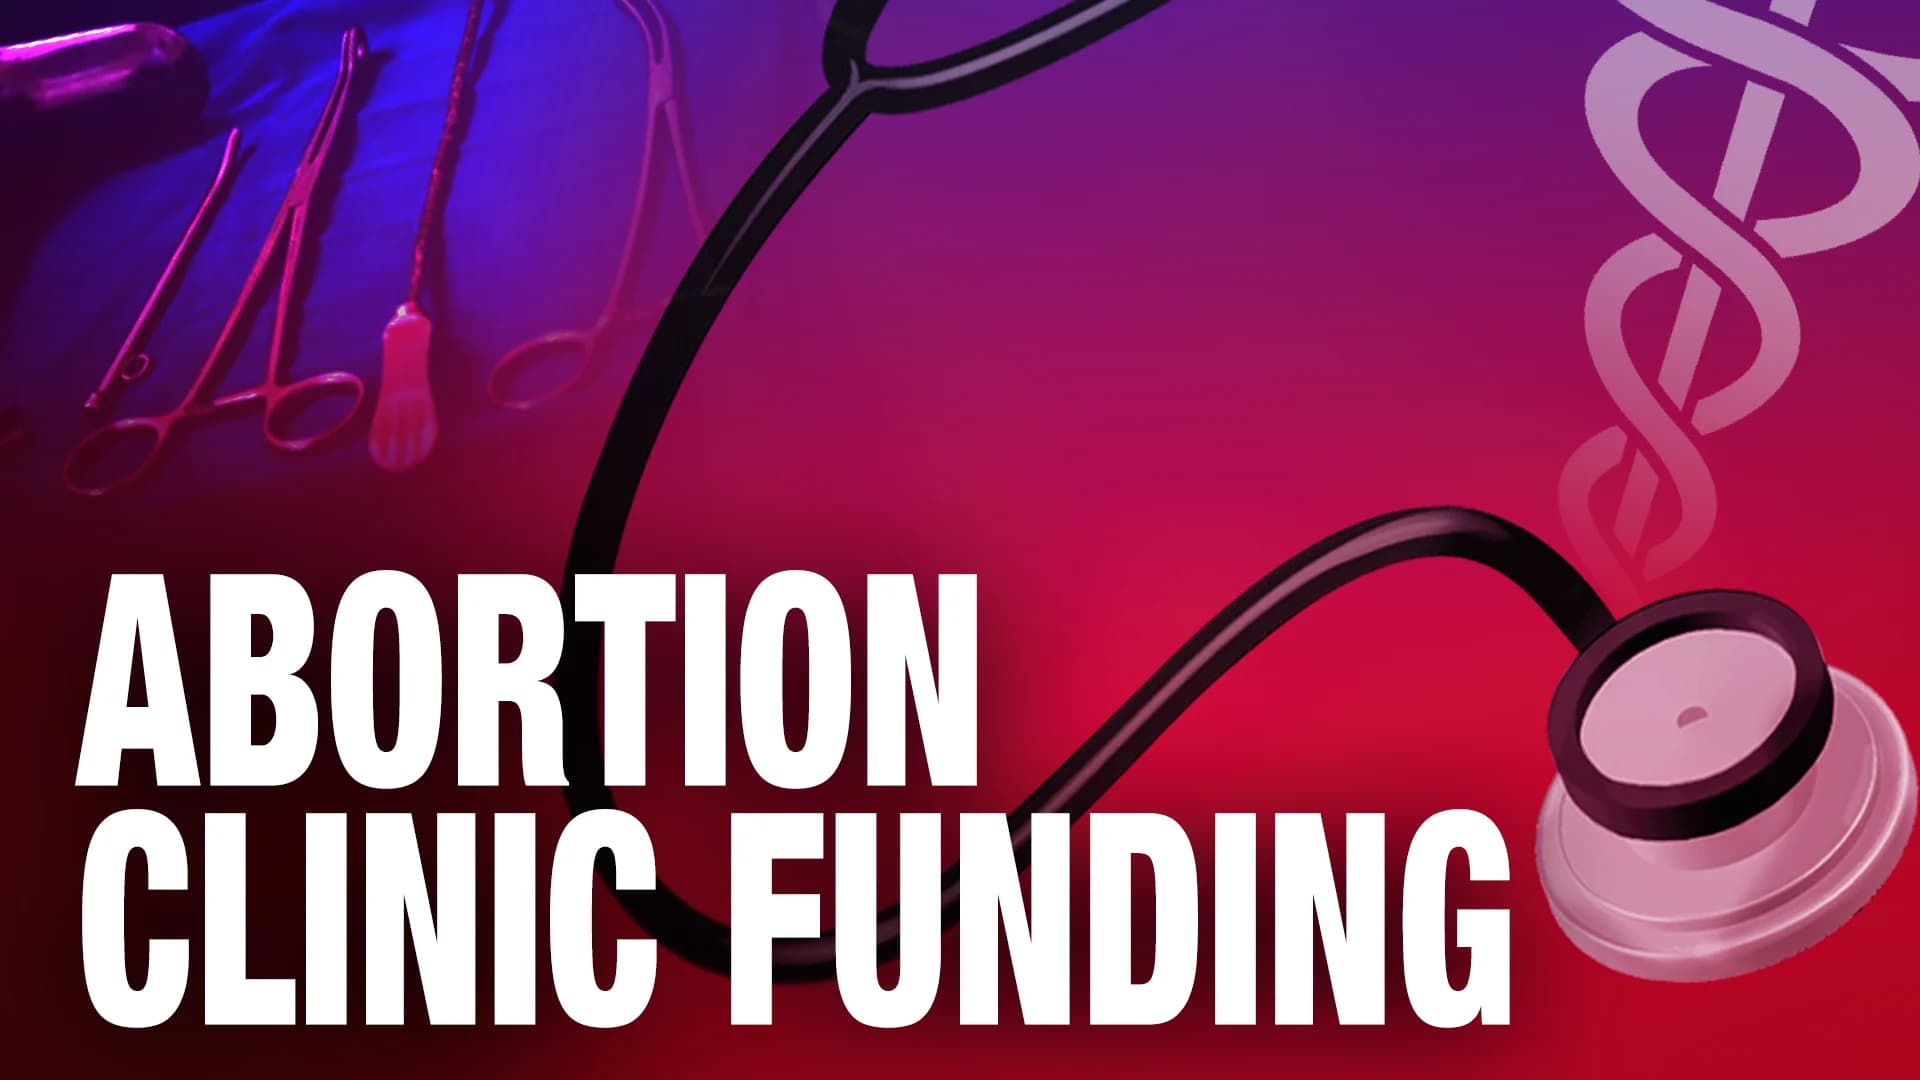 New Jersey sets aside $15M for abortion provider upgrades